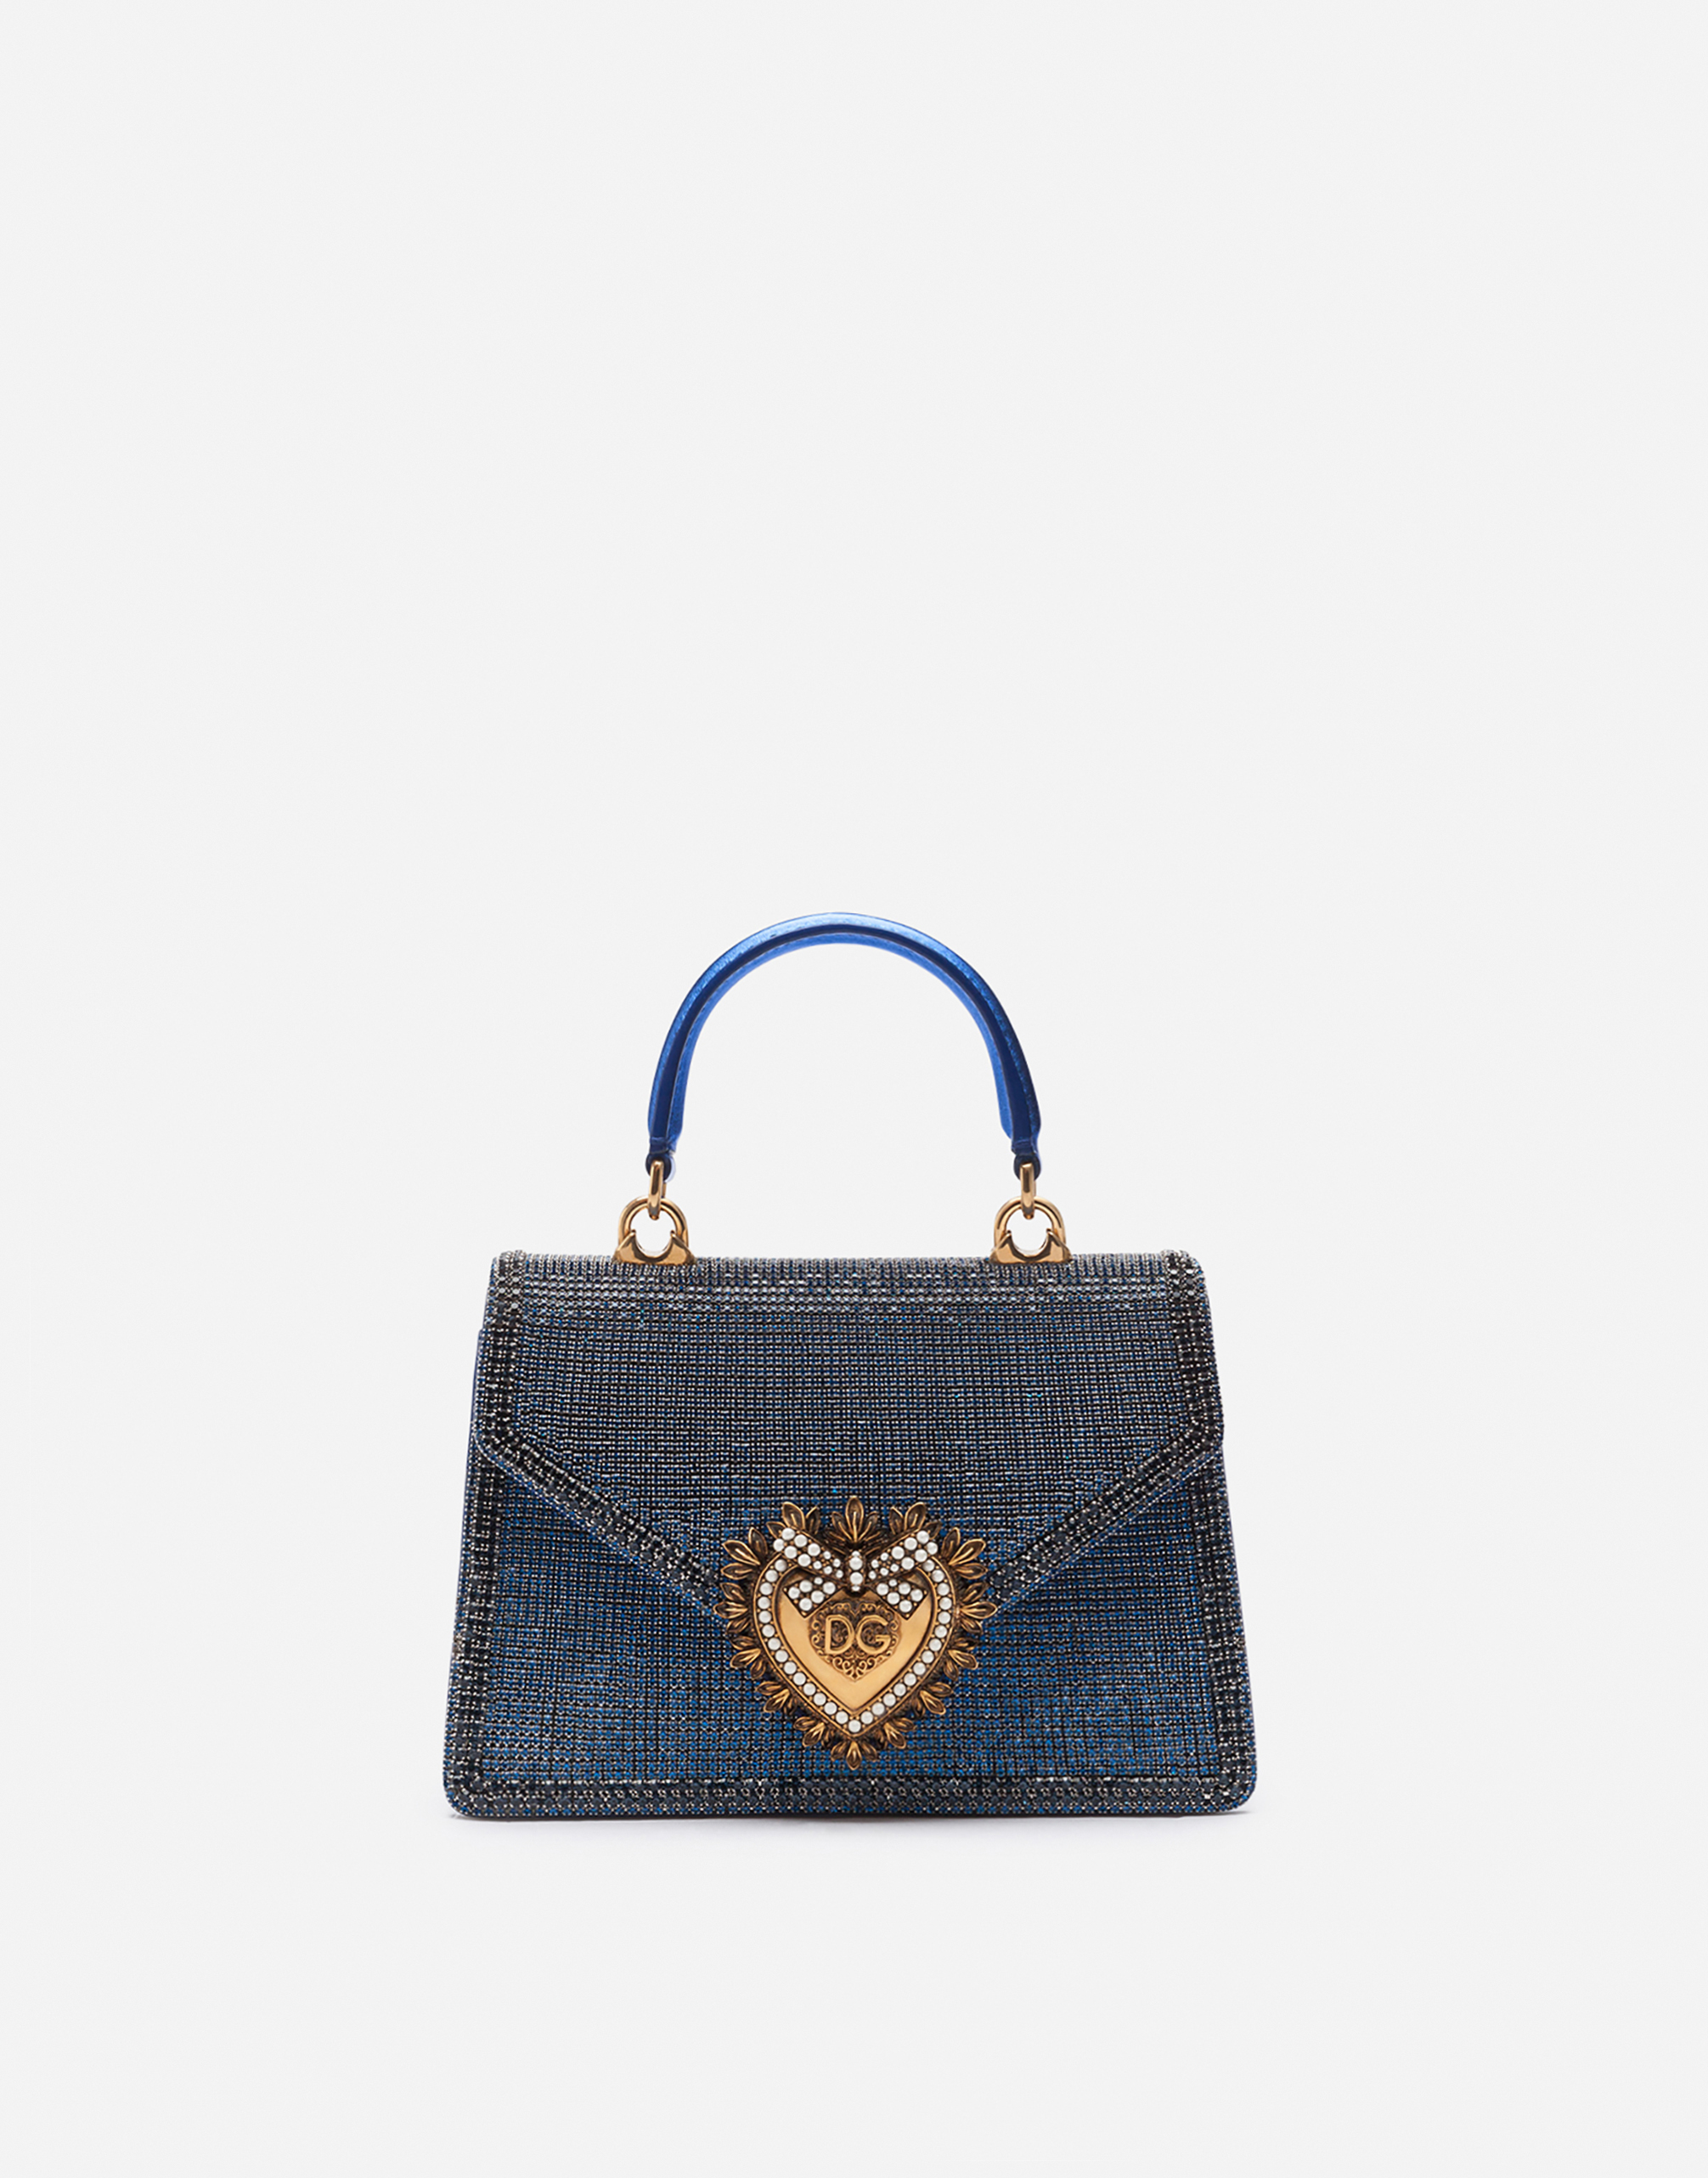 Small Devotion bag in mordore nappa leather with rhinestone detailing in Blue